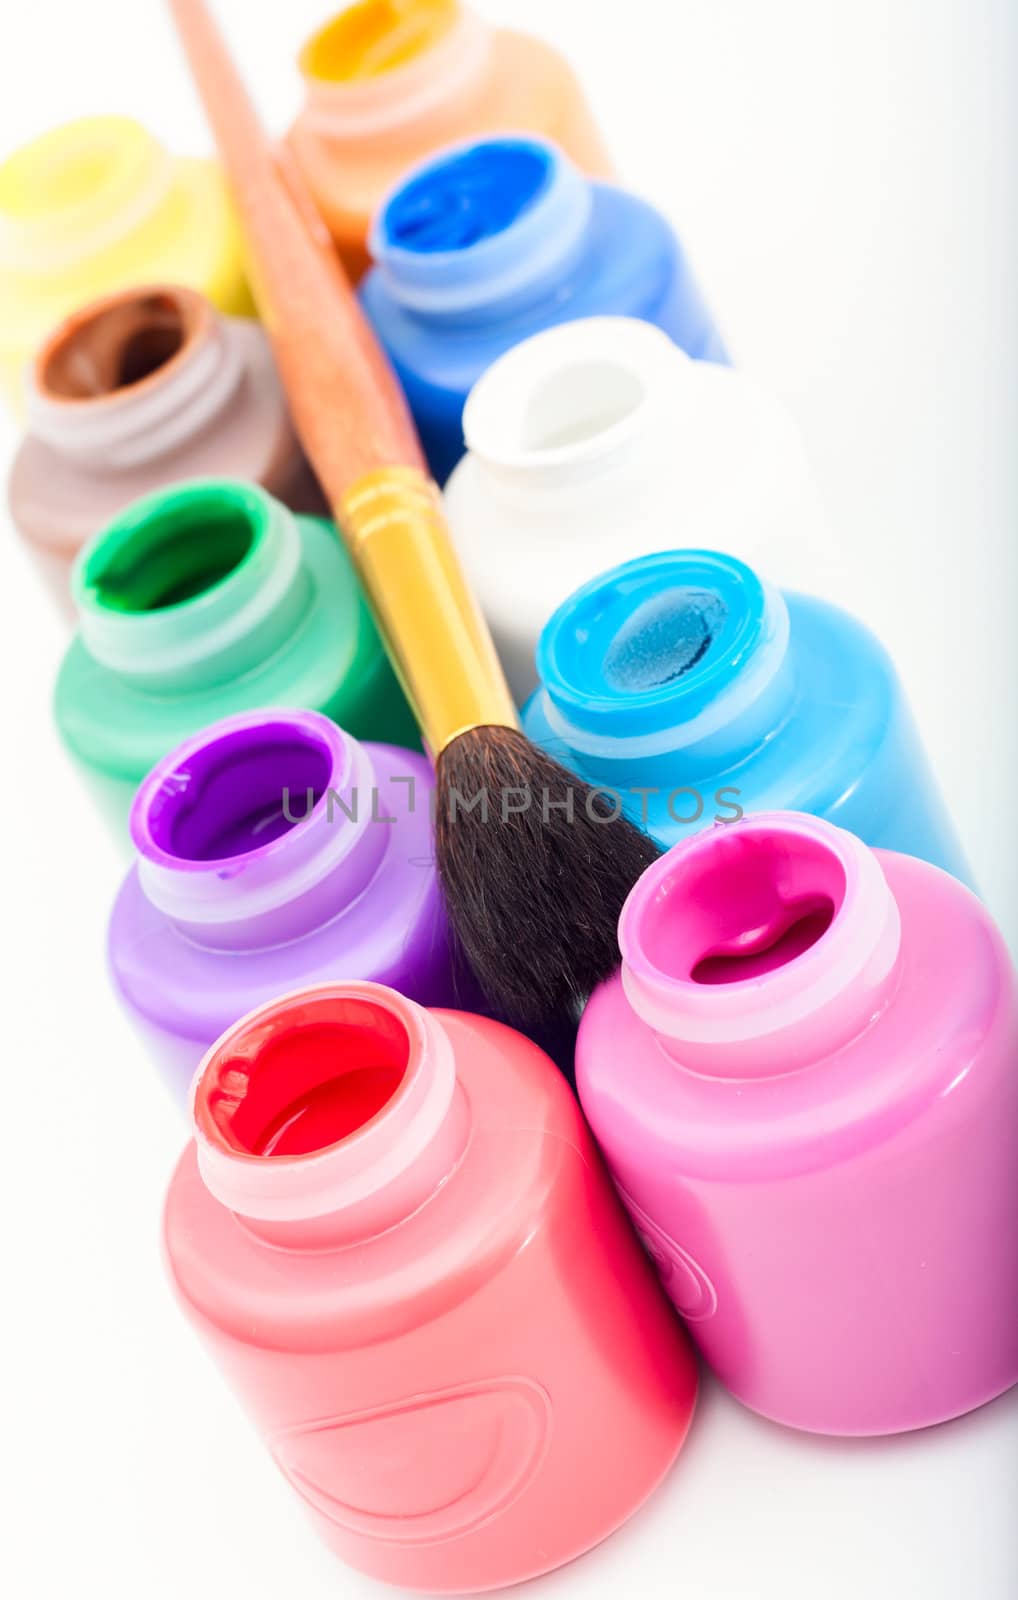 Mini paint cans and brush by aleksan